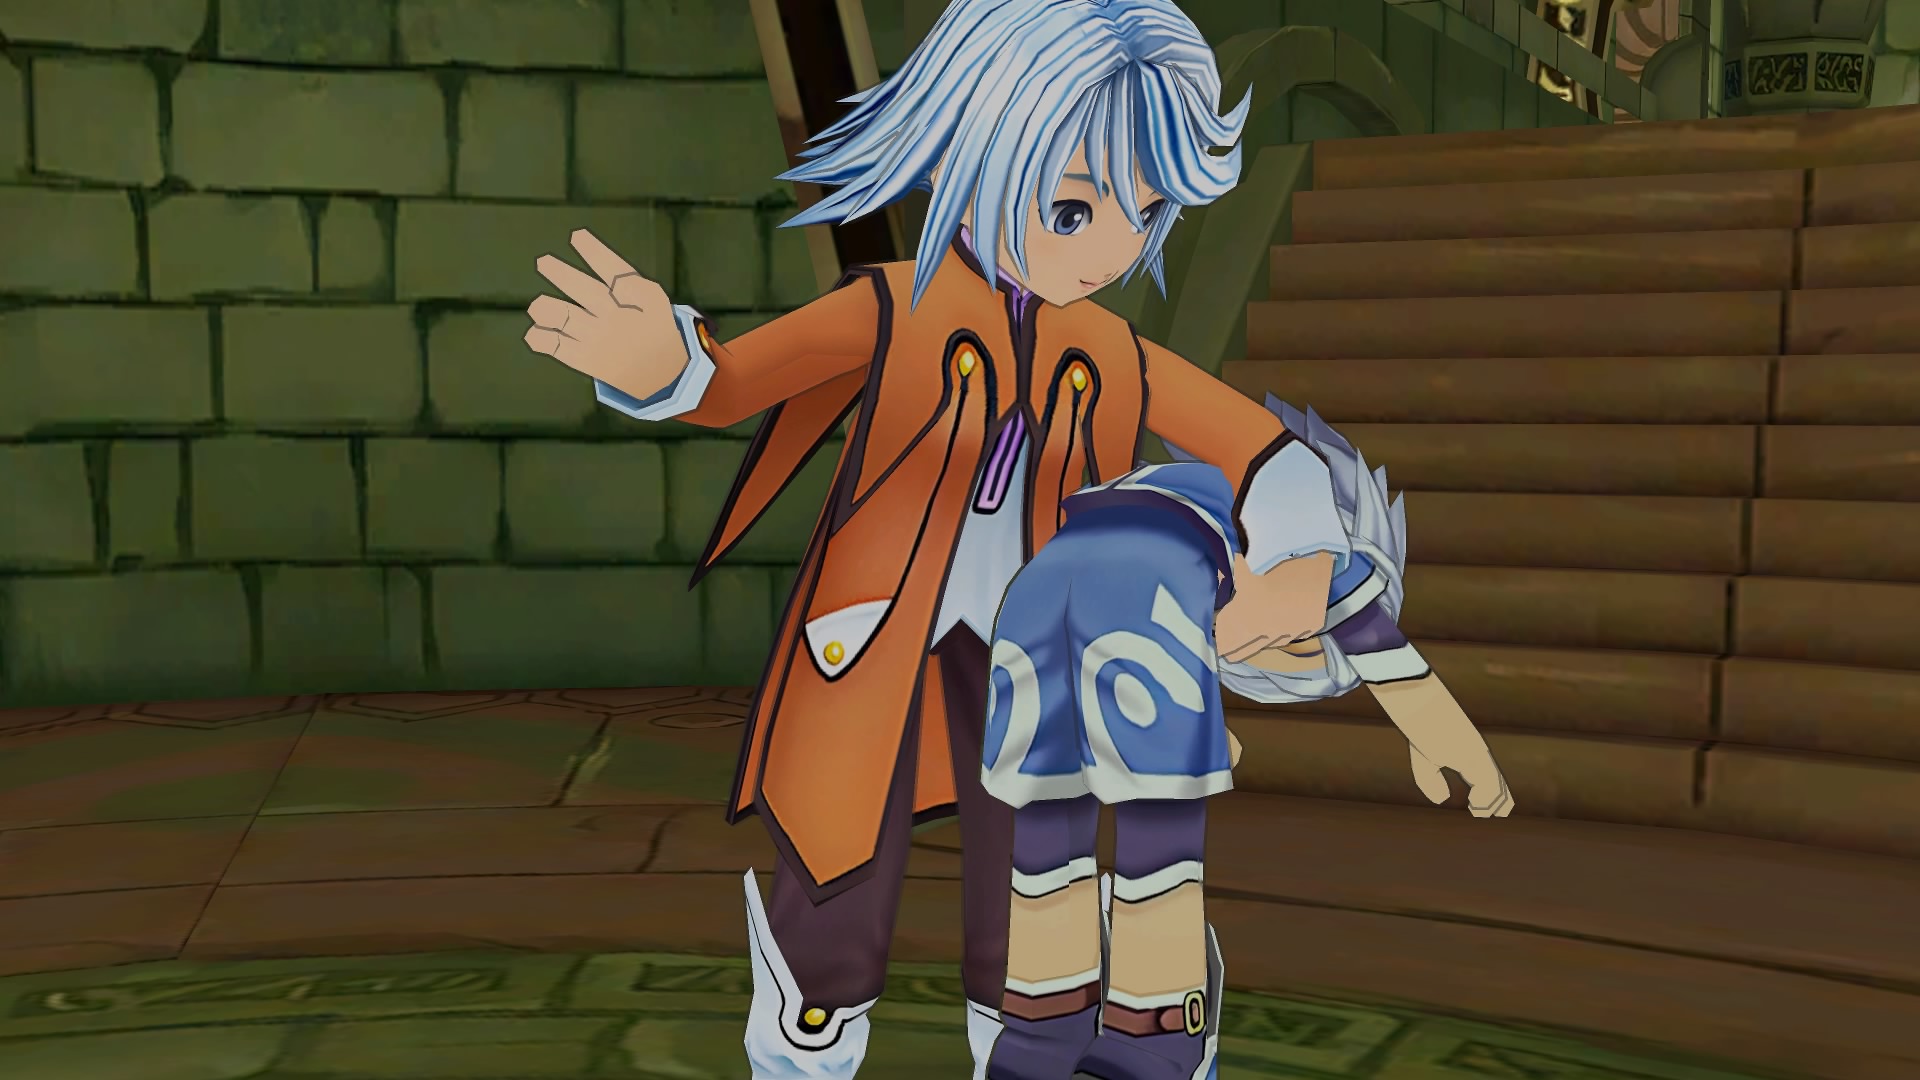 tales of symphonia remastered test